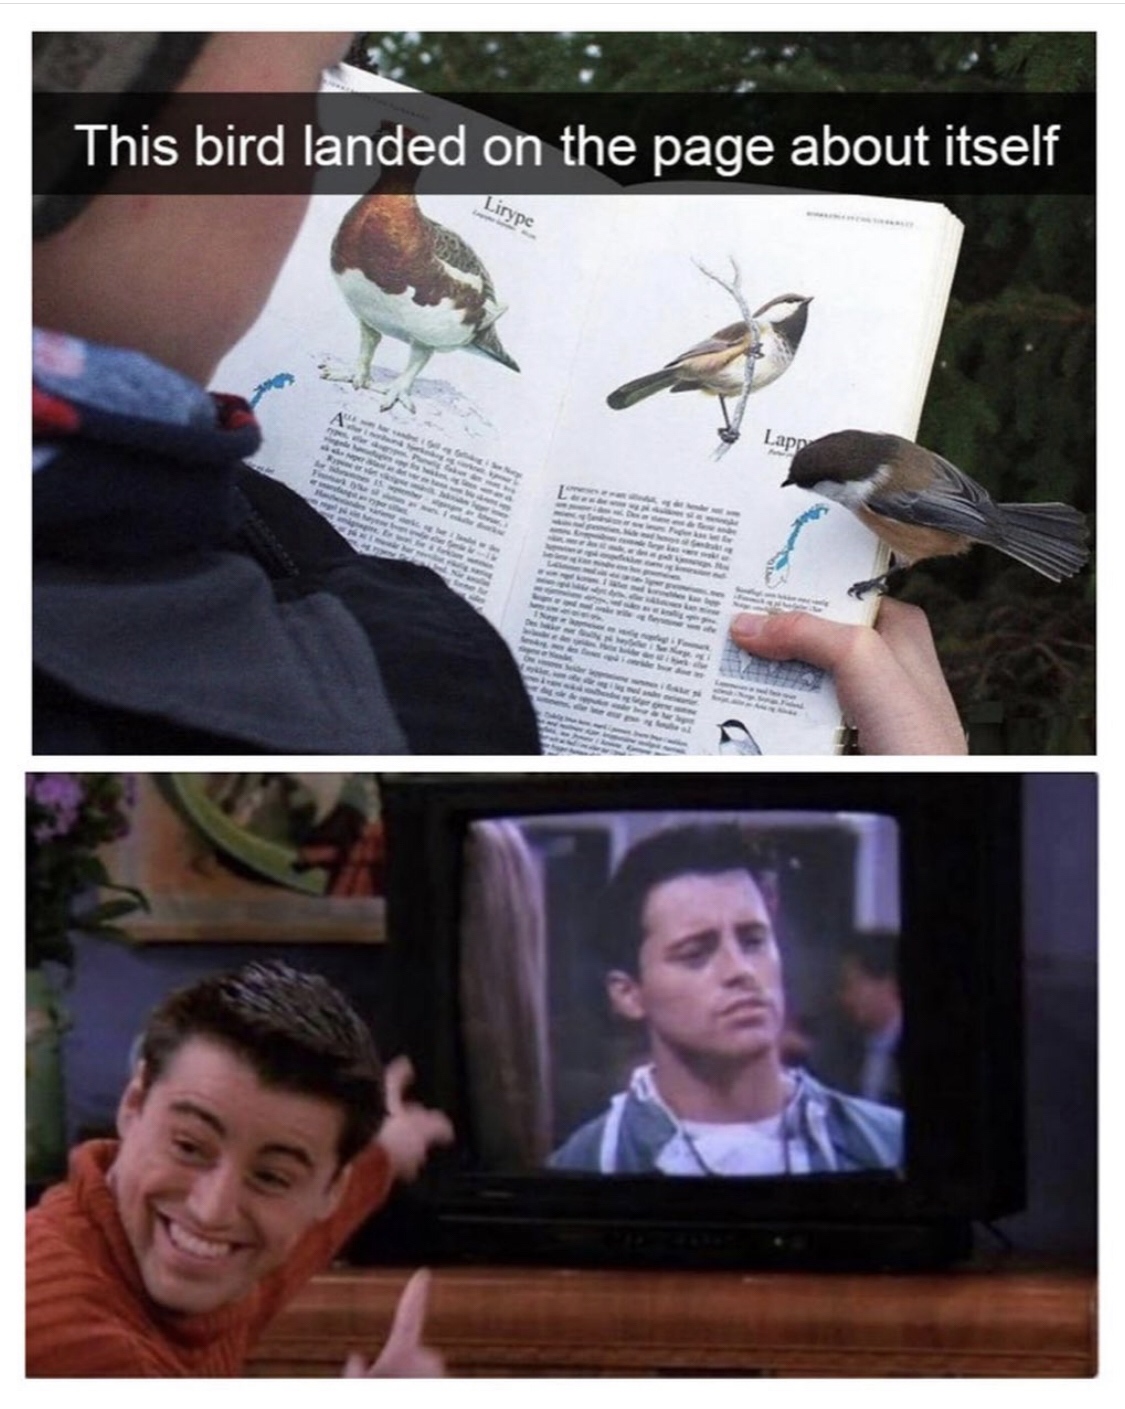 joey friends - This bird landed on the page about itself Lirype Lapp